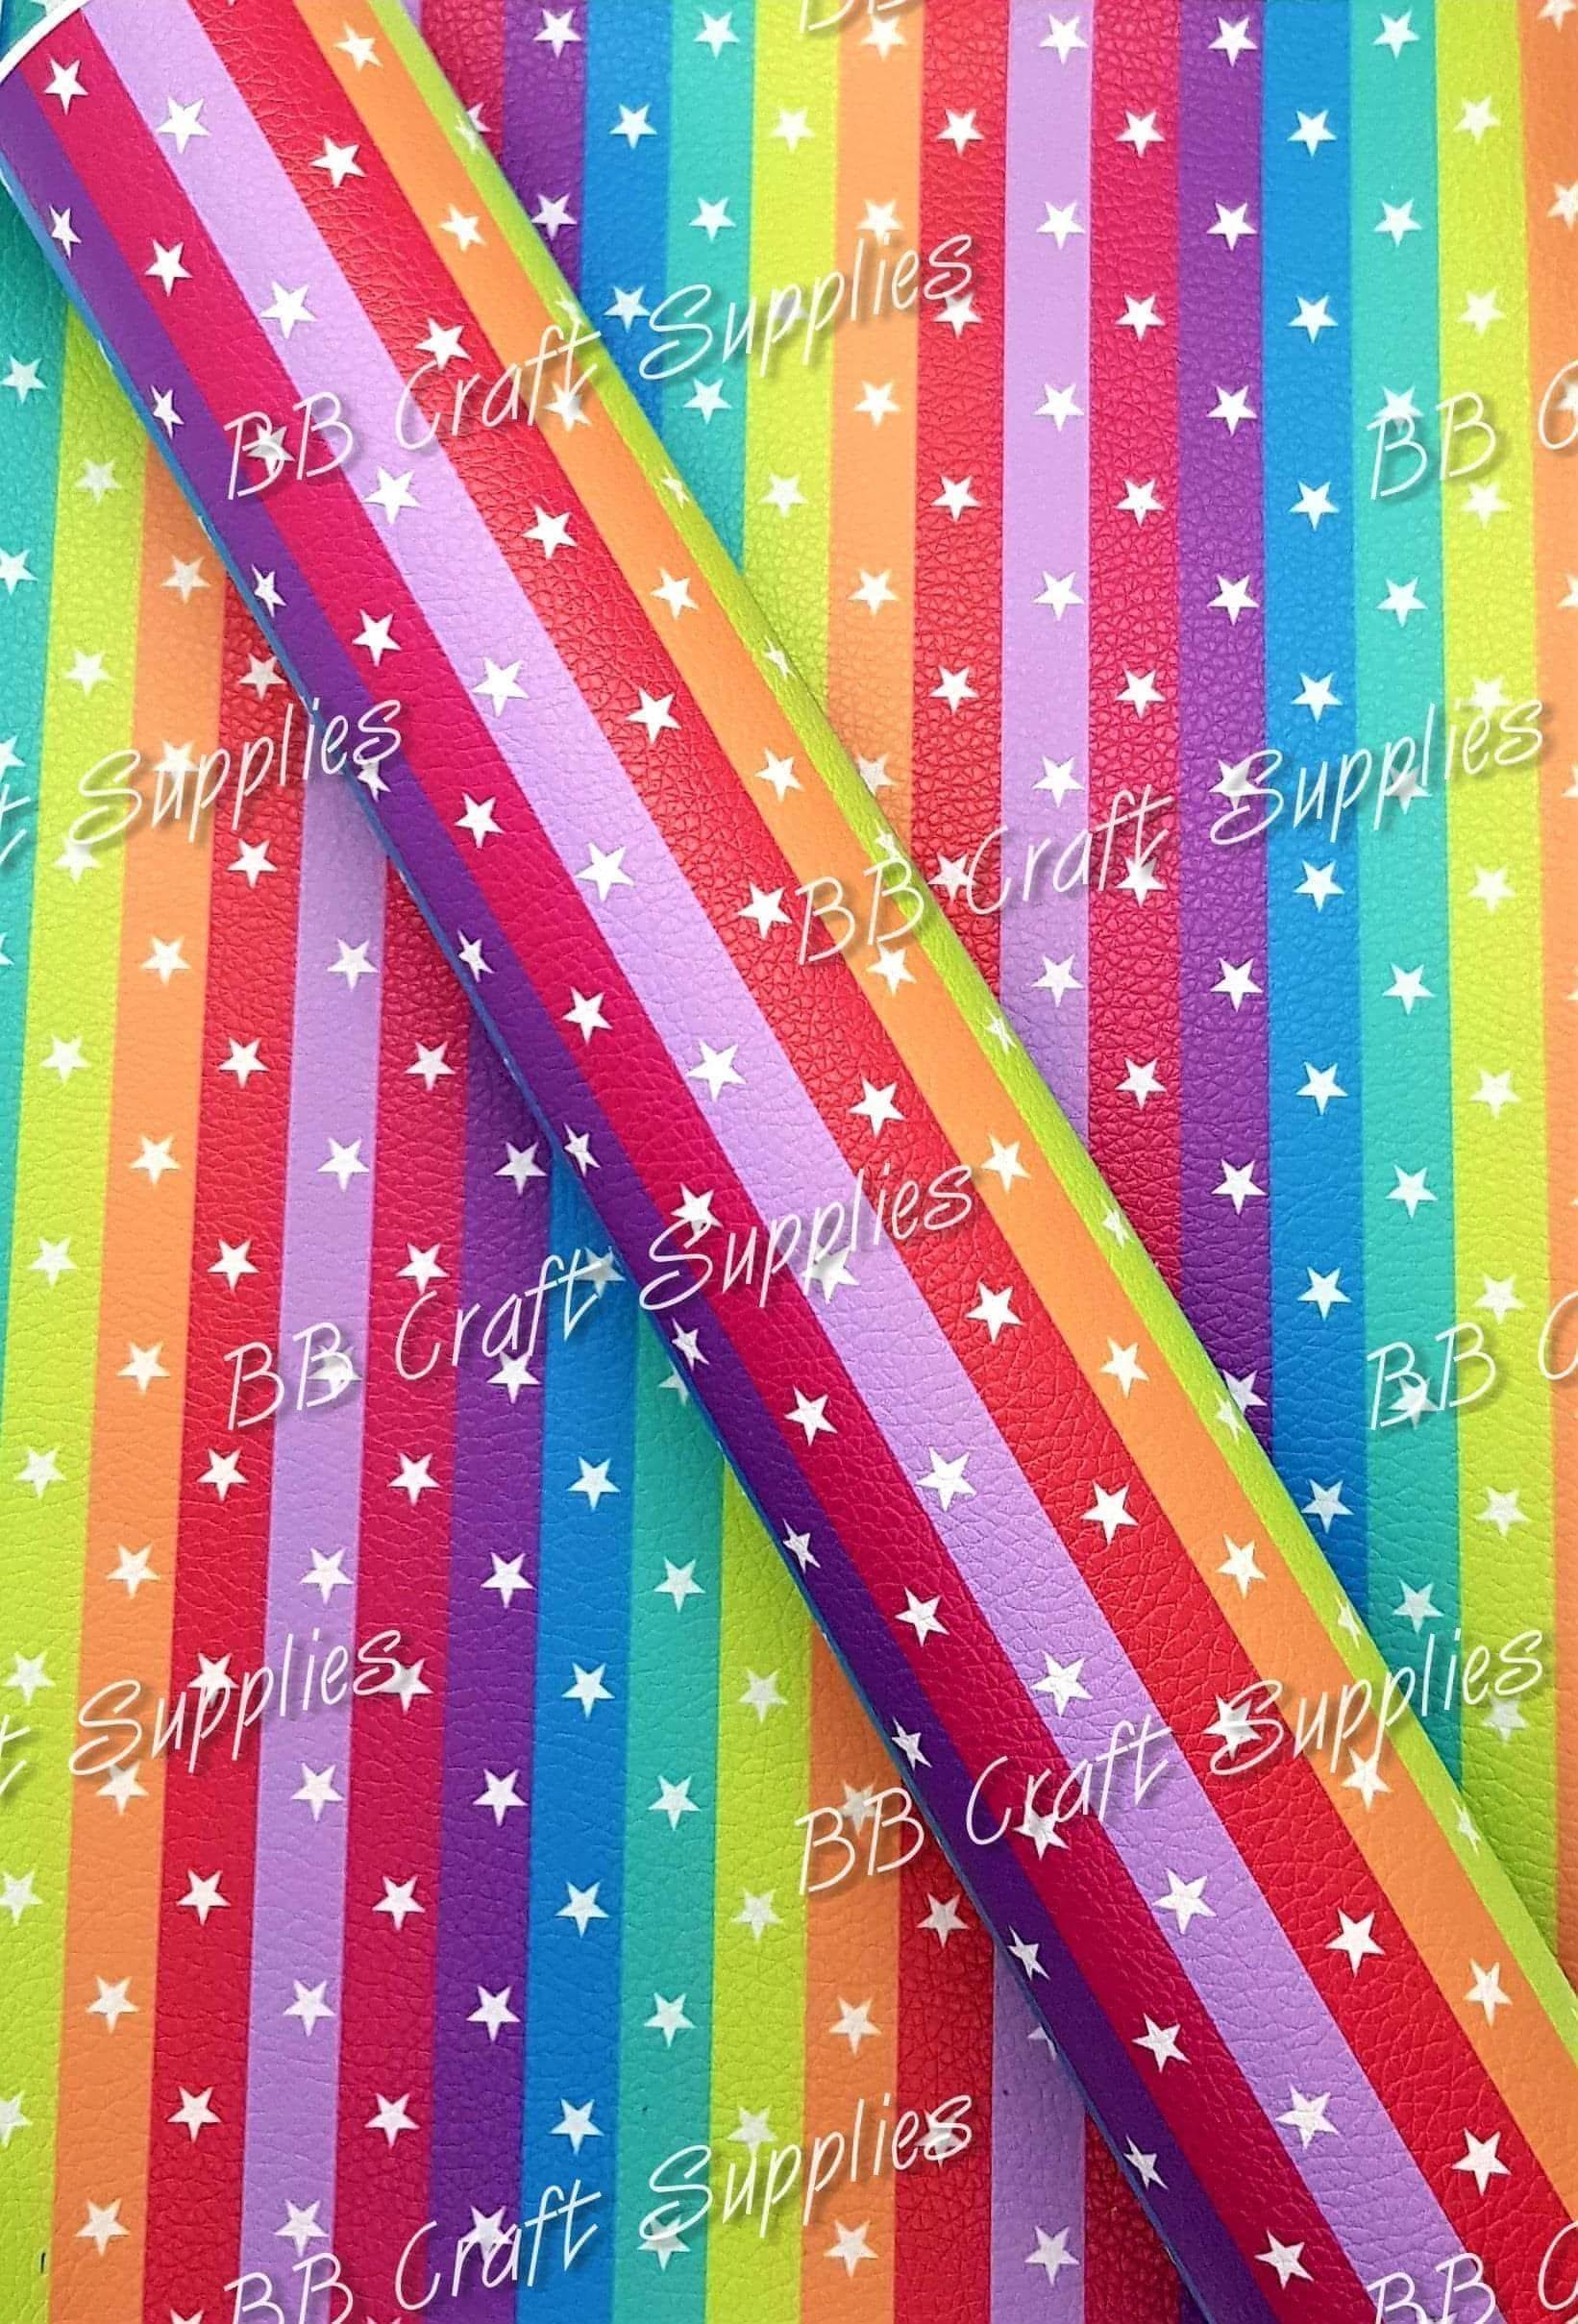 Rainbow Stars Litchi - Faux, Faux Leather, Leather, leatherette, Litchi, Rainbow, Rainbows, Star, starry, Stars - Bare Butler Faux Leather Supplies 